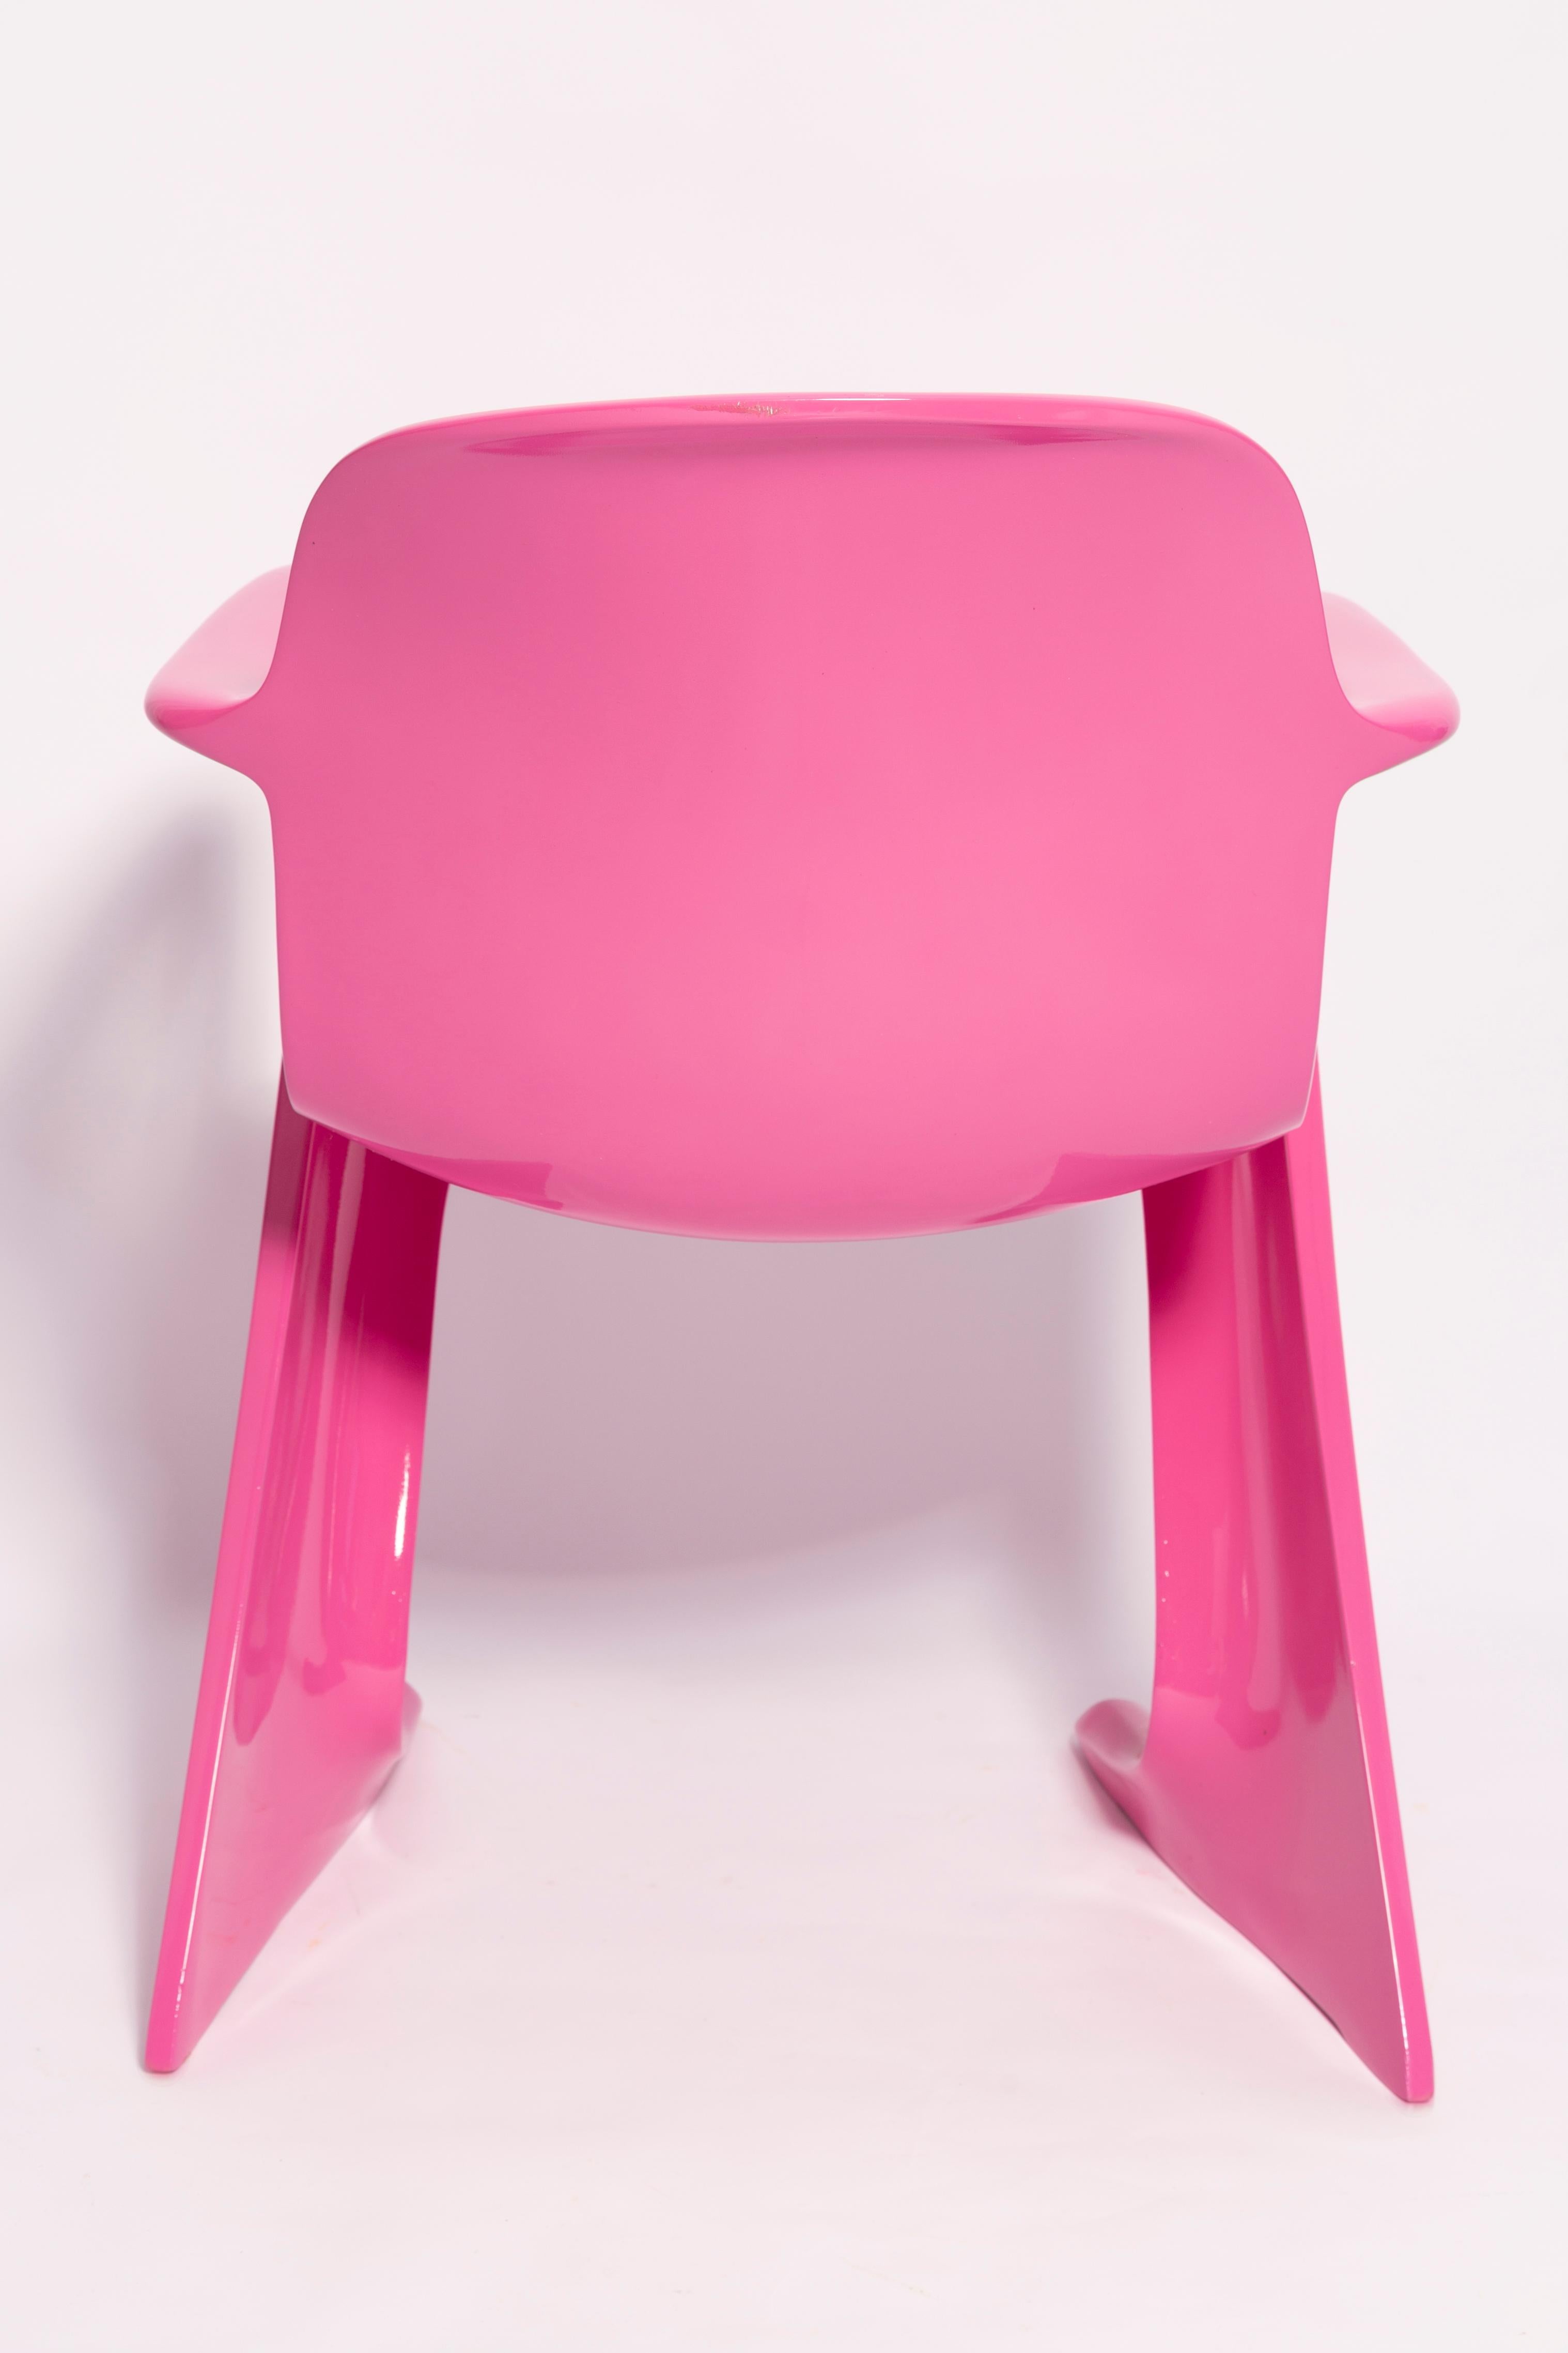 Fiberglass Mid Century Pink Kangaroo Chair Designed by Ernst Moeckl, Germany, 1968 For Sale